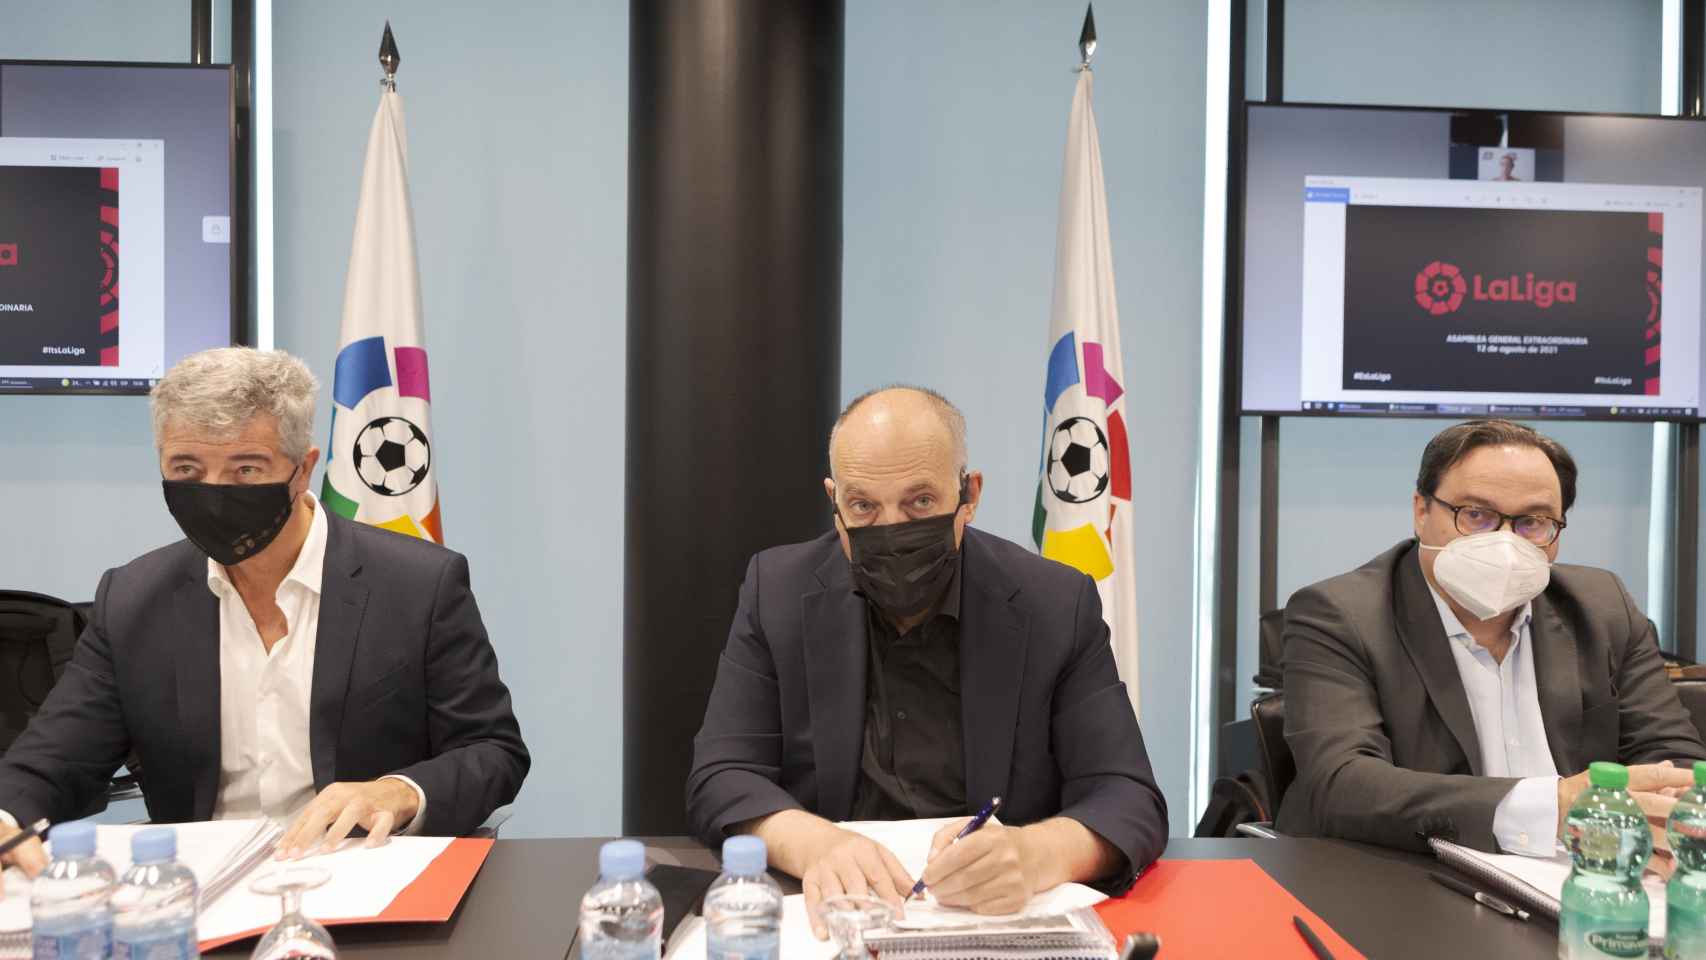 Javier Tebas, president of LaLiga, (center) together with Miguel Ángel Gil (left), first vice president of LaLiga, during the Extraordinary Assembly